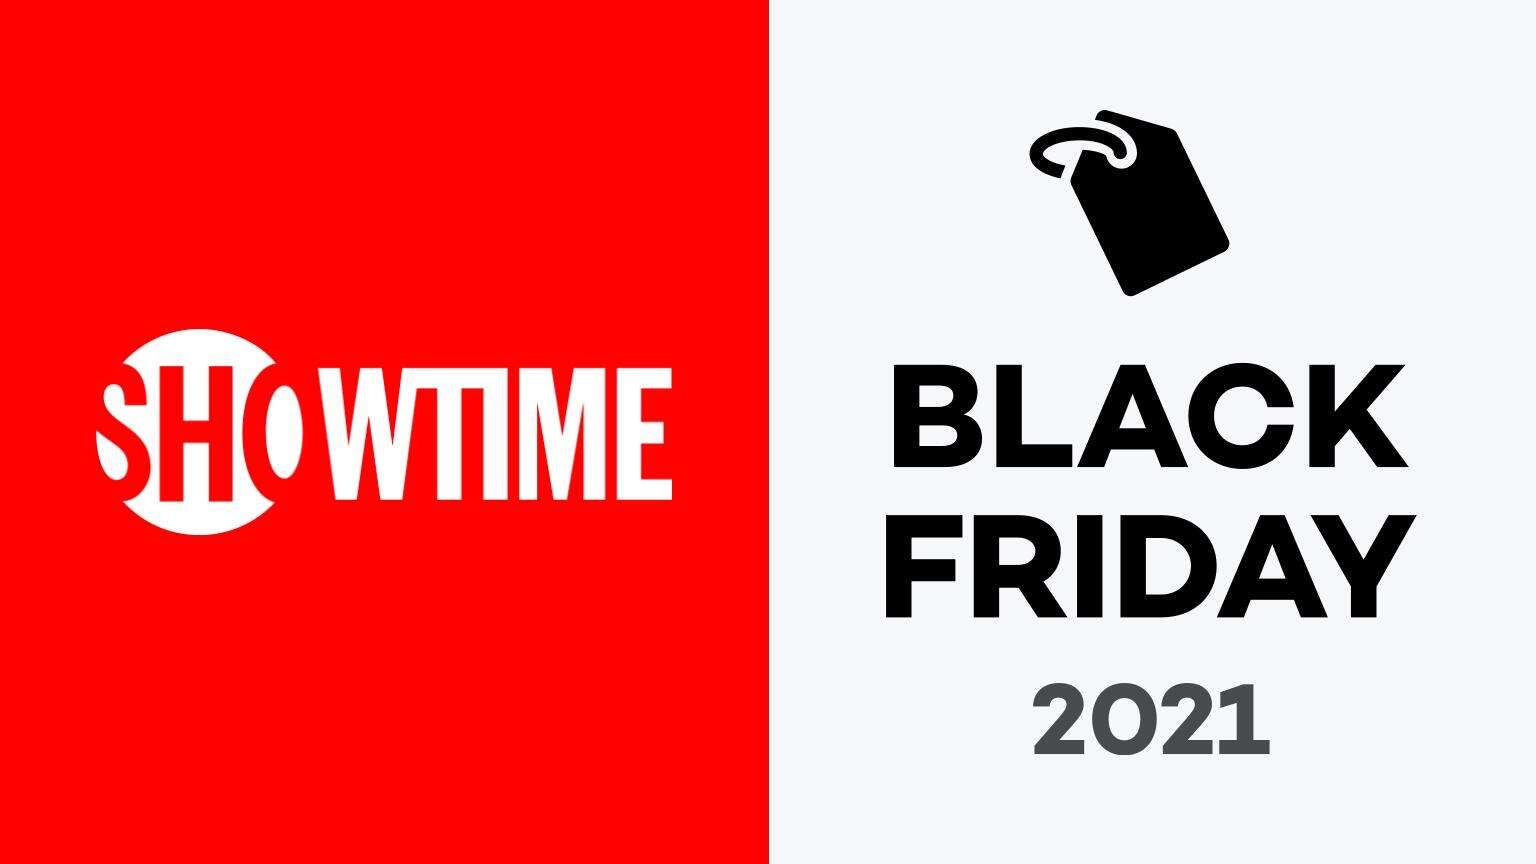 Showtime Black Friday 2021 Deals and Sales What Are the Best Ways to